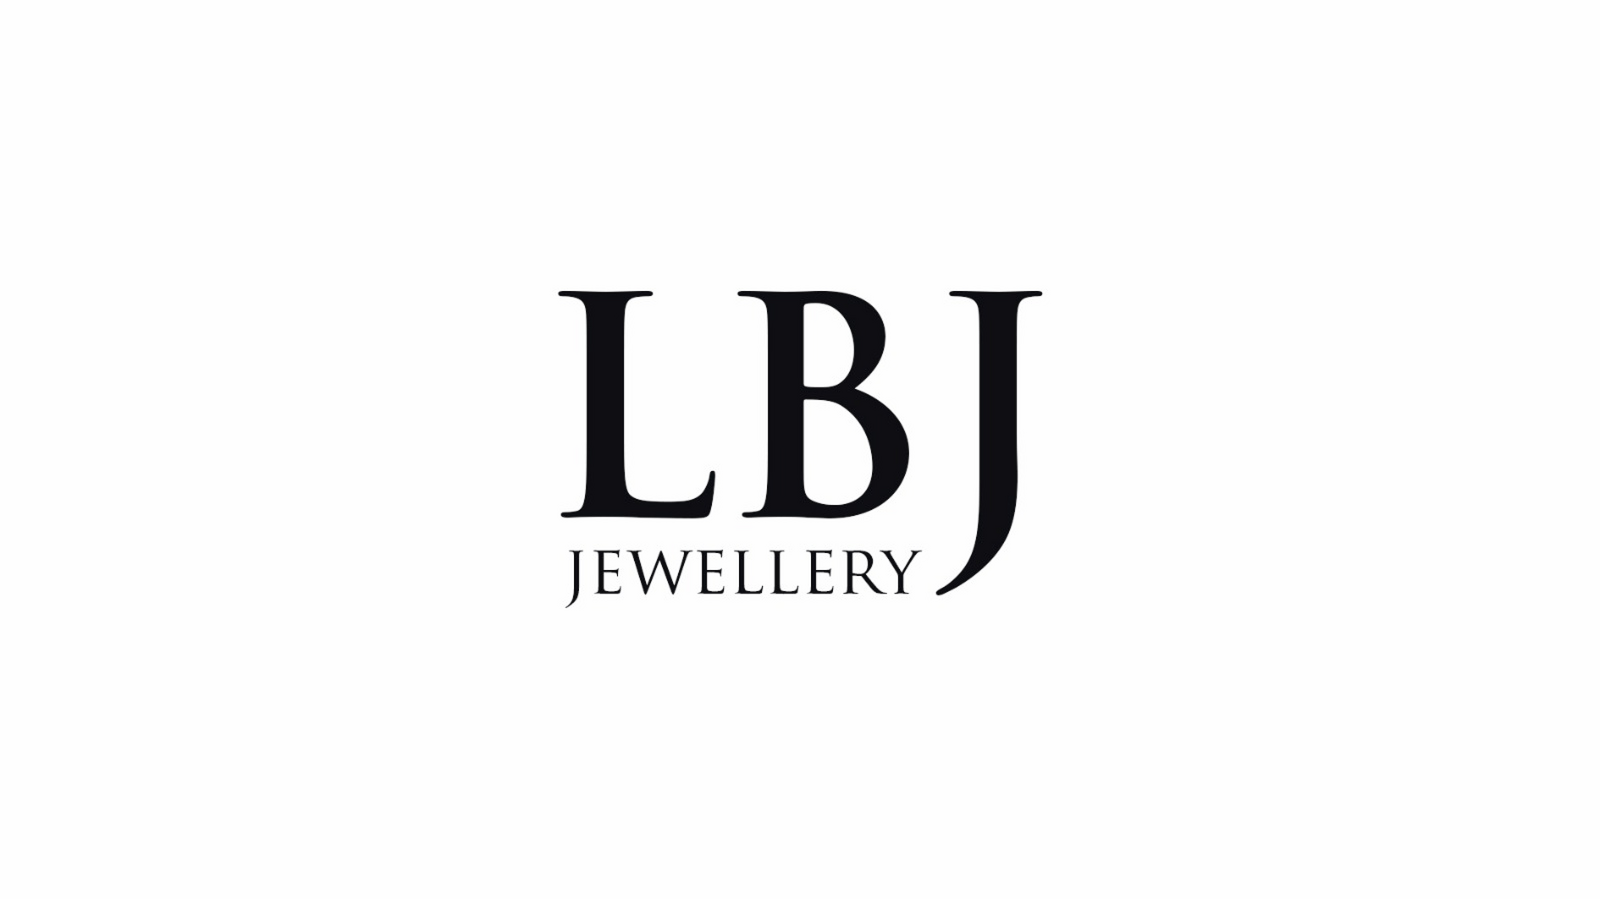 LBJ Jewellery - Spring Fair 2021 - The UK's No.1 Gift & Home Trade Show